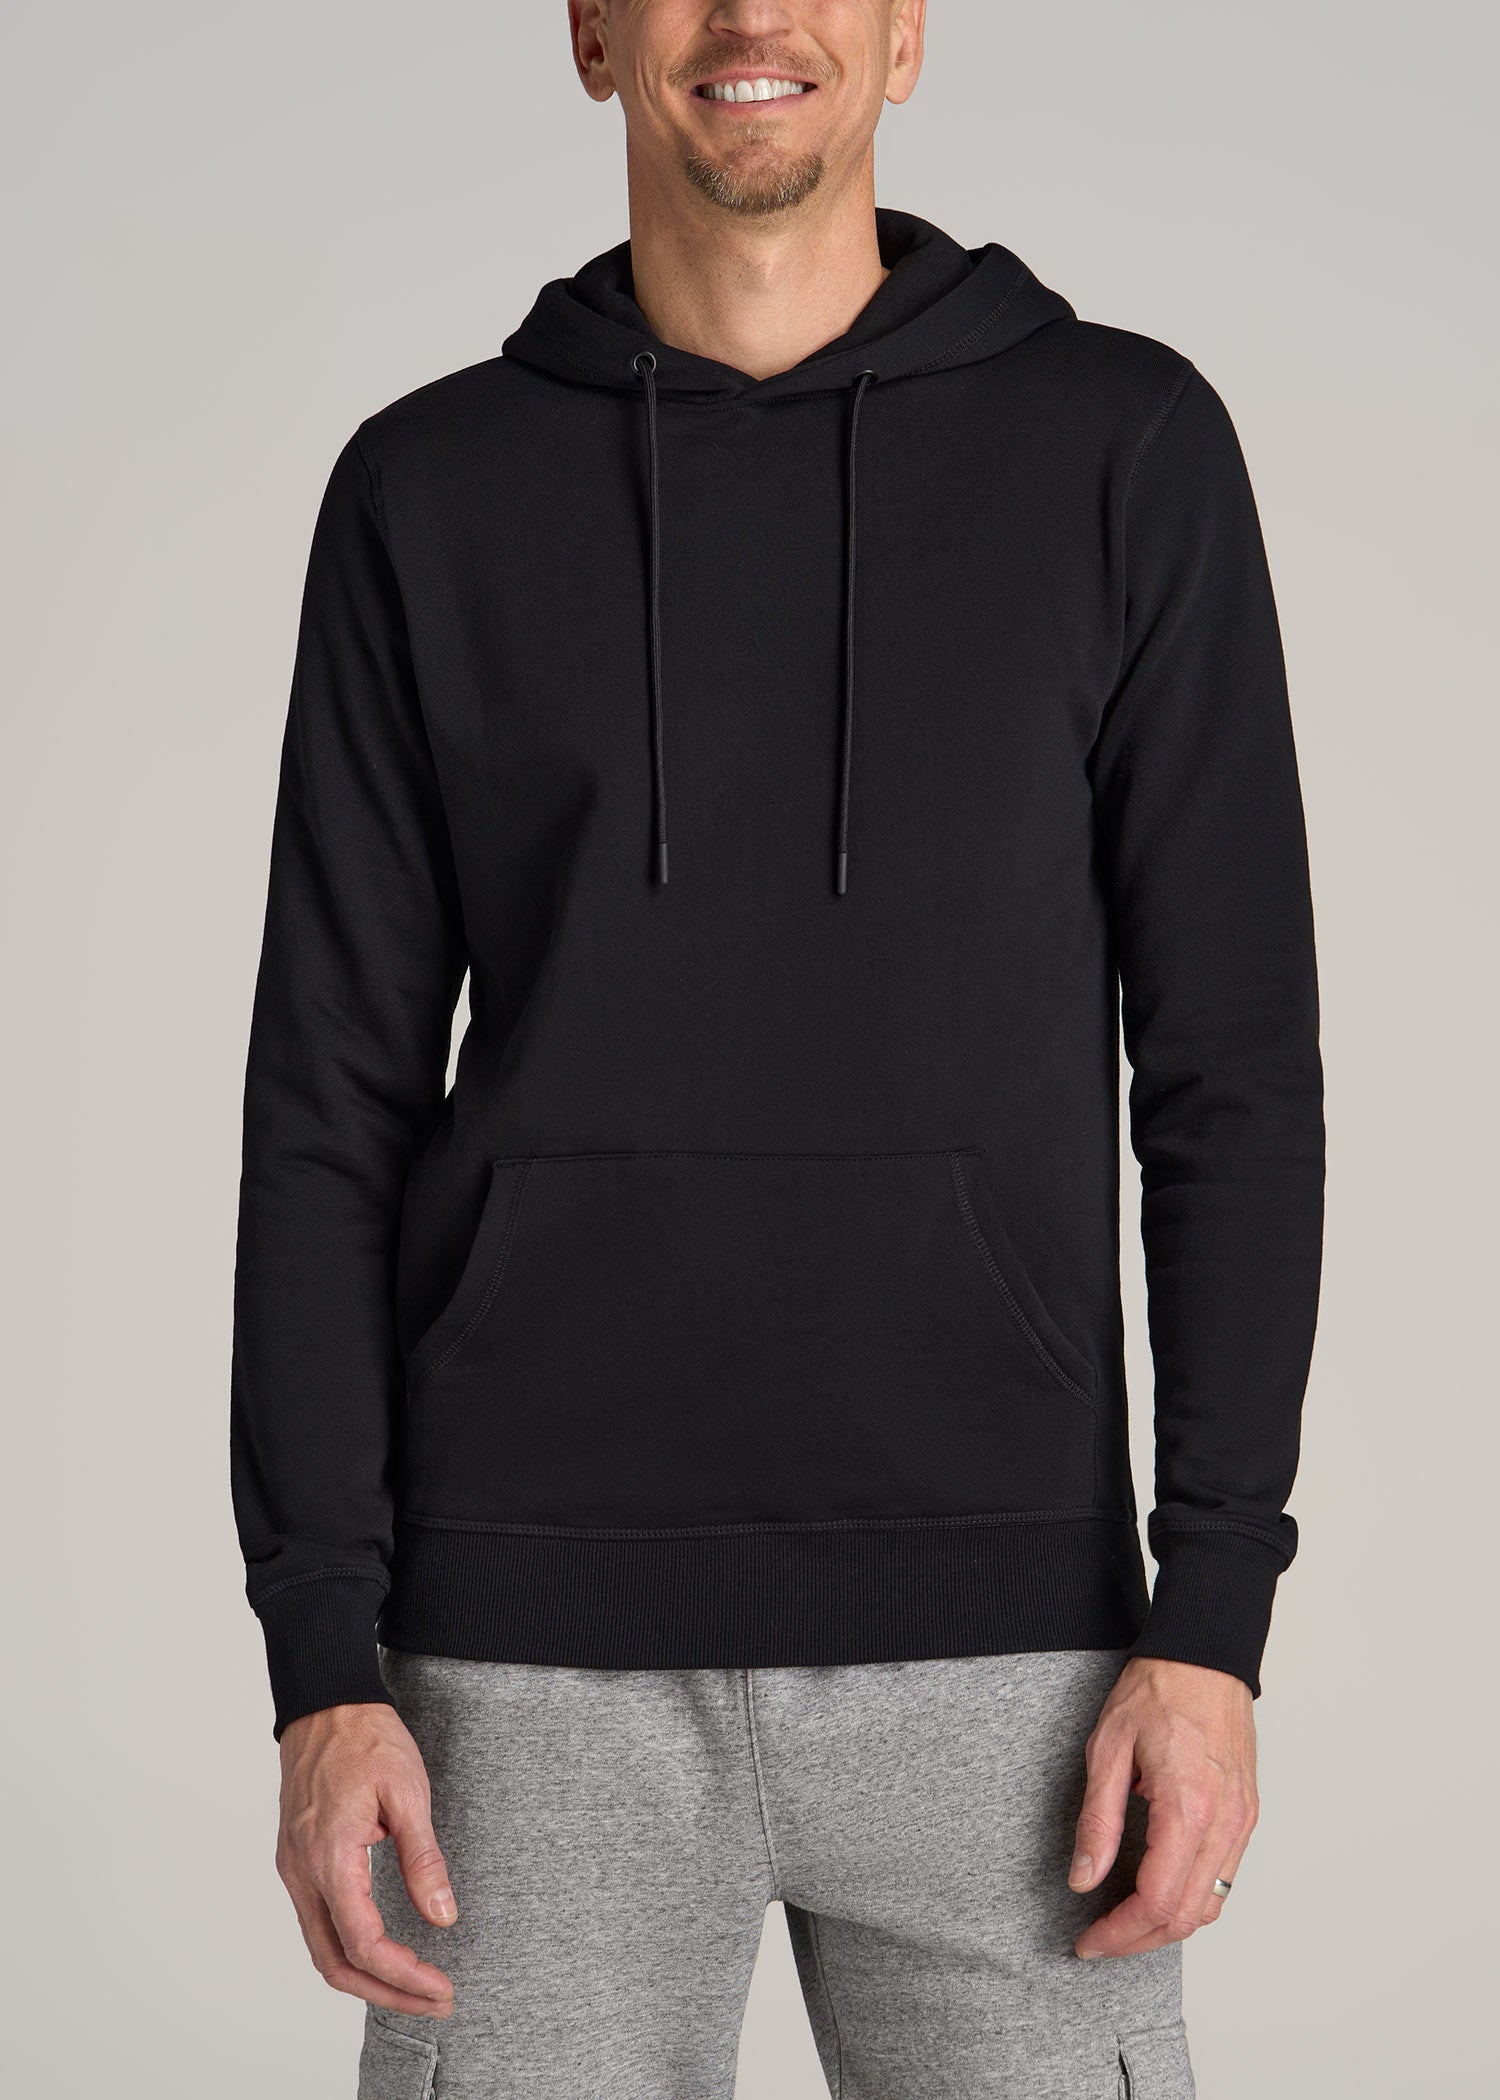 Black Hoodie with Sweatpants Relaxed Spring Outfits For Men In